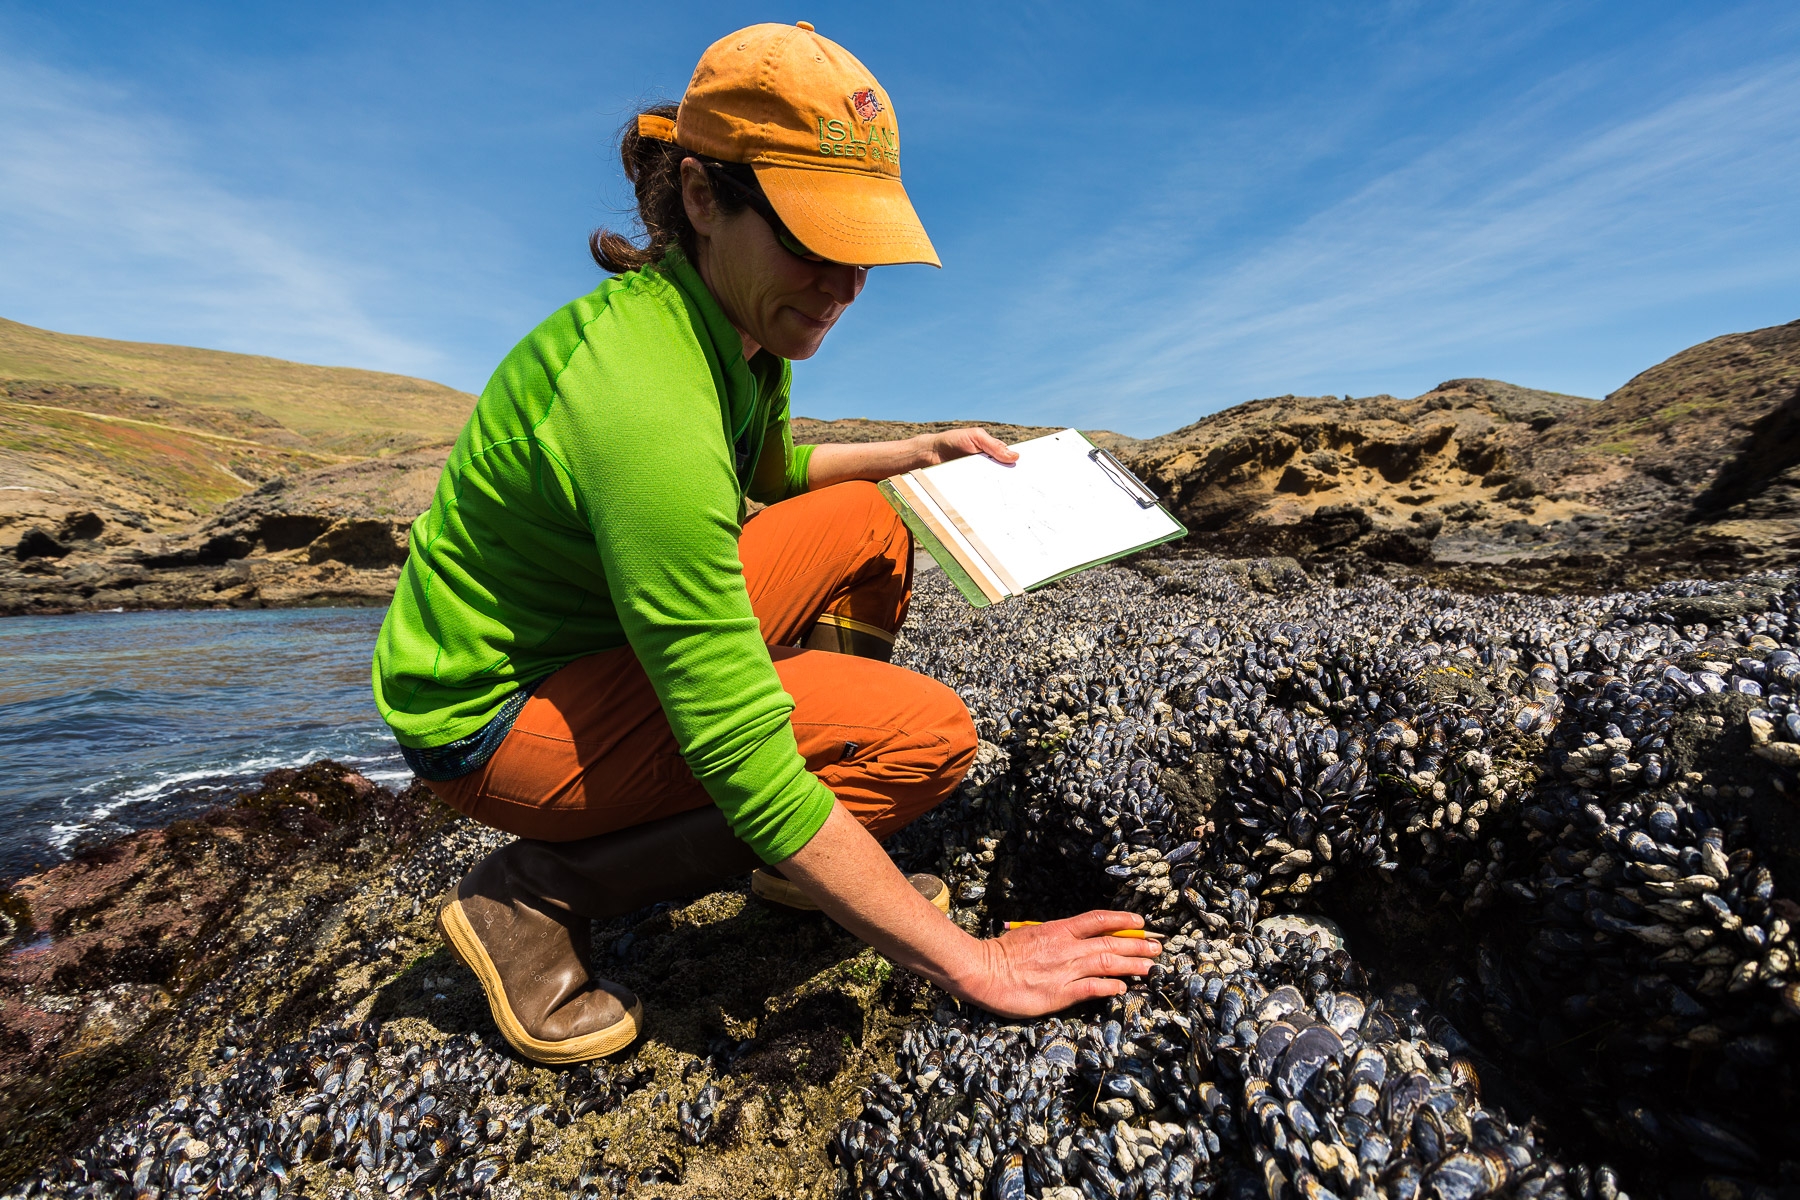 researcher on the hunt for abalone, sea stars, mussels and other marine organisms. 